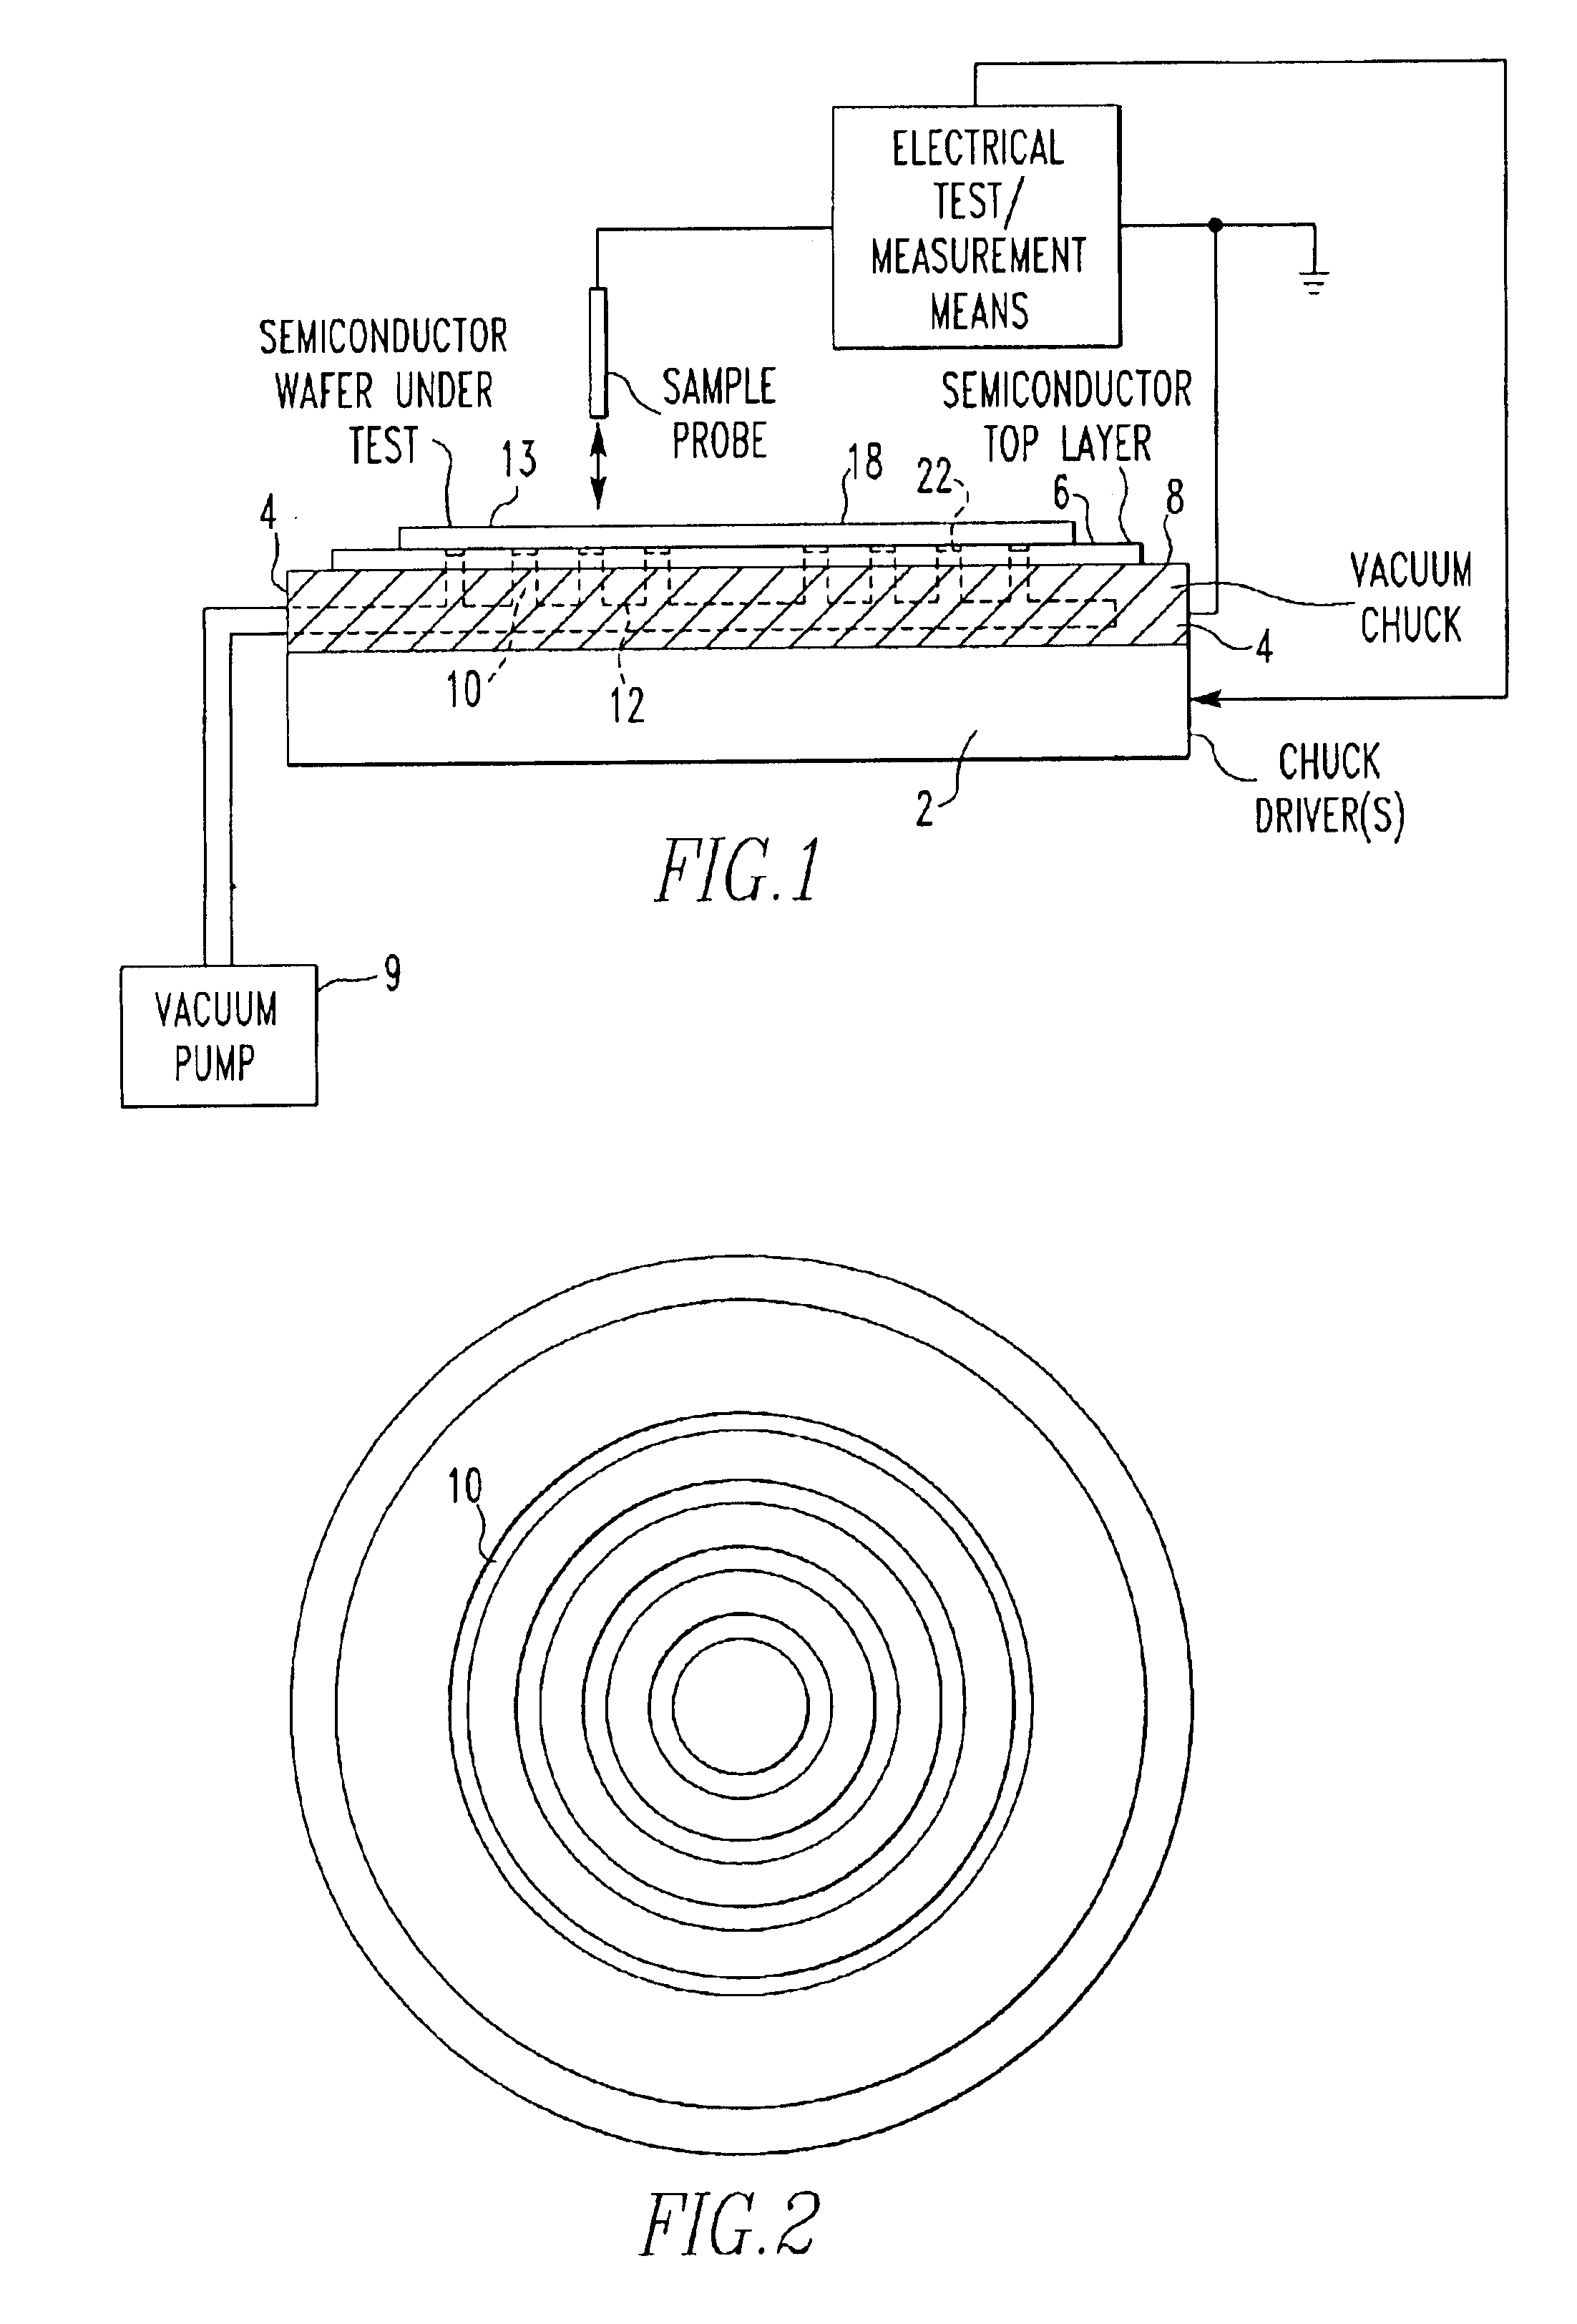 Method and apparatus for testing semiconductor wafers